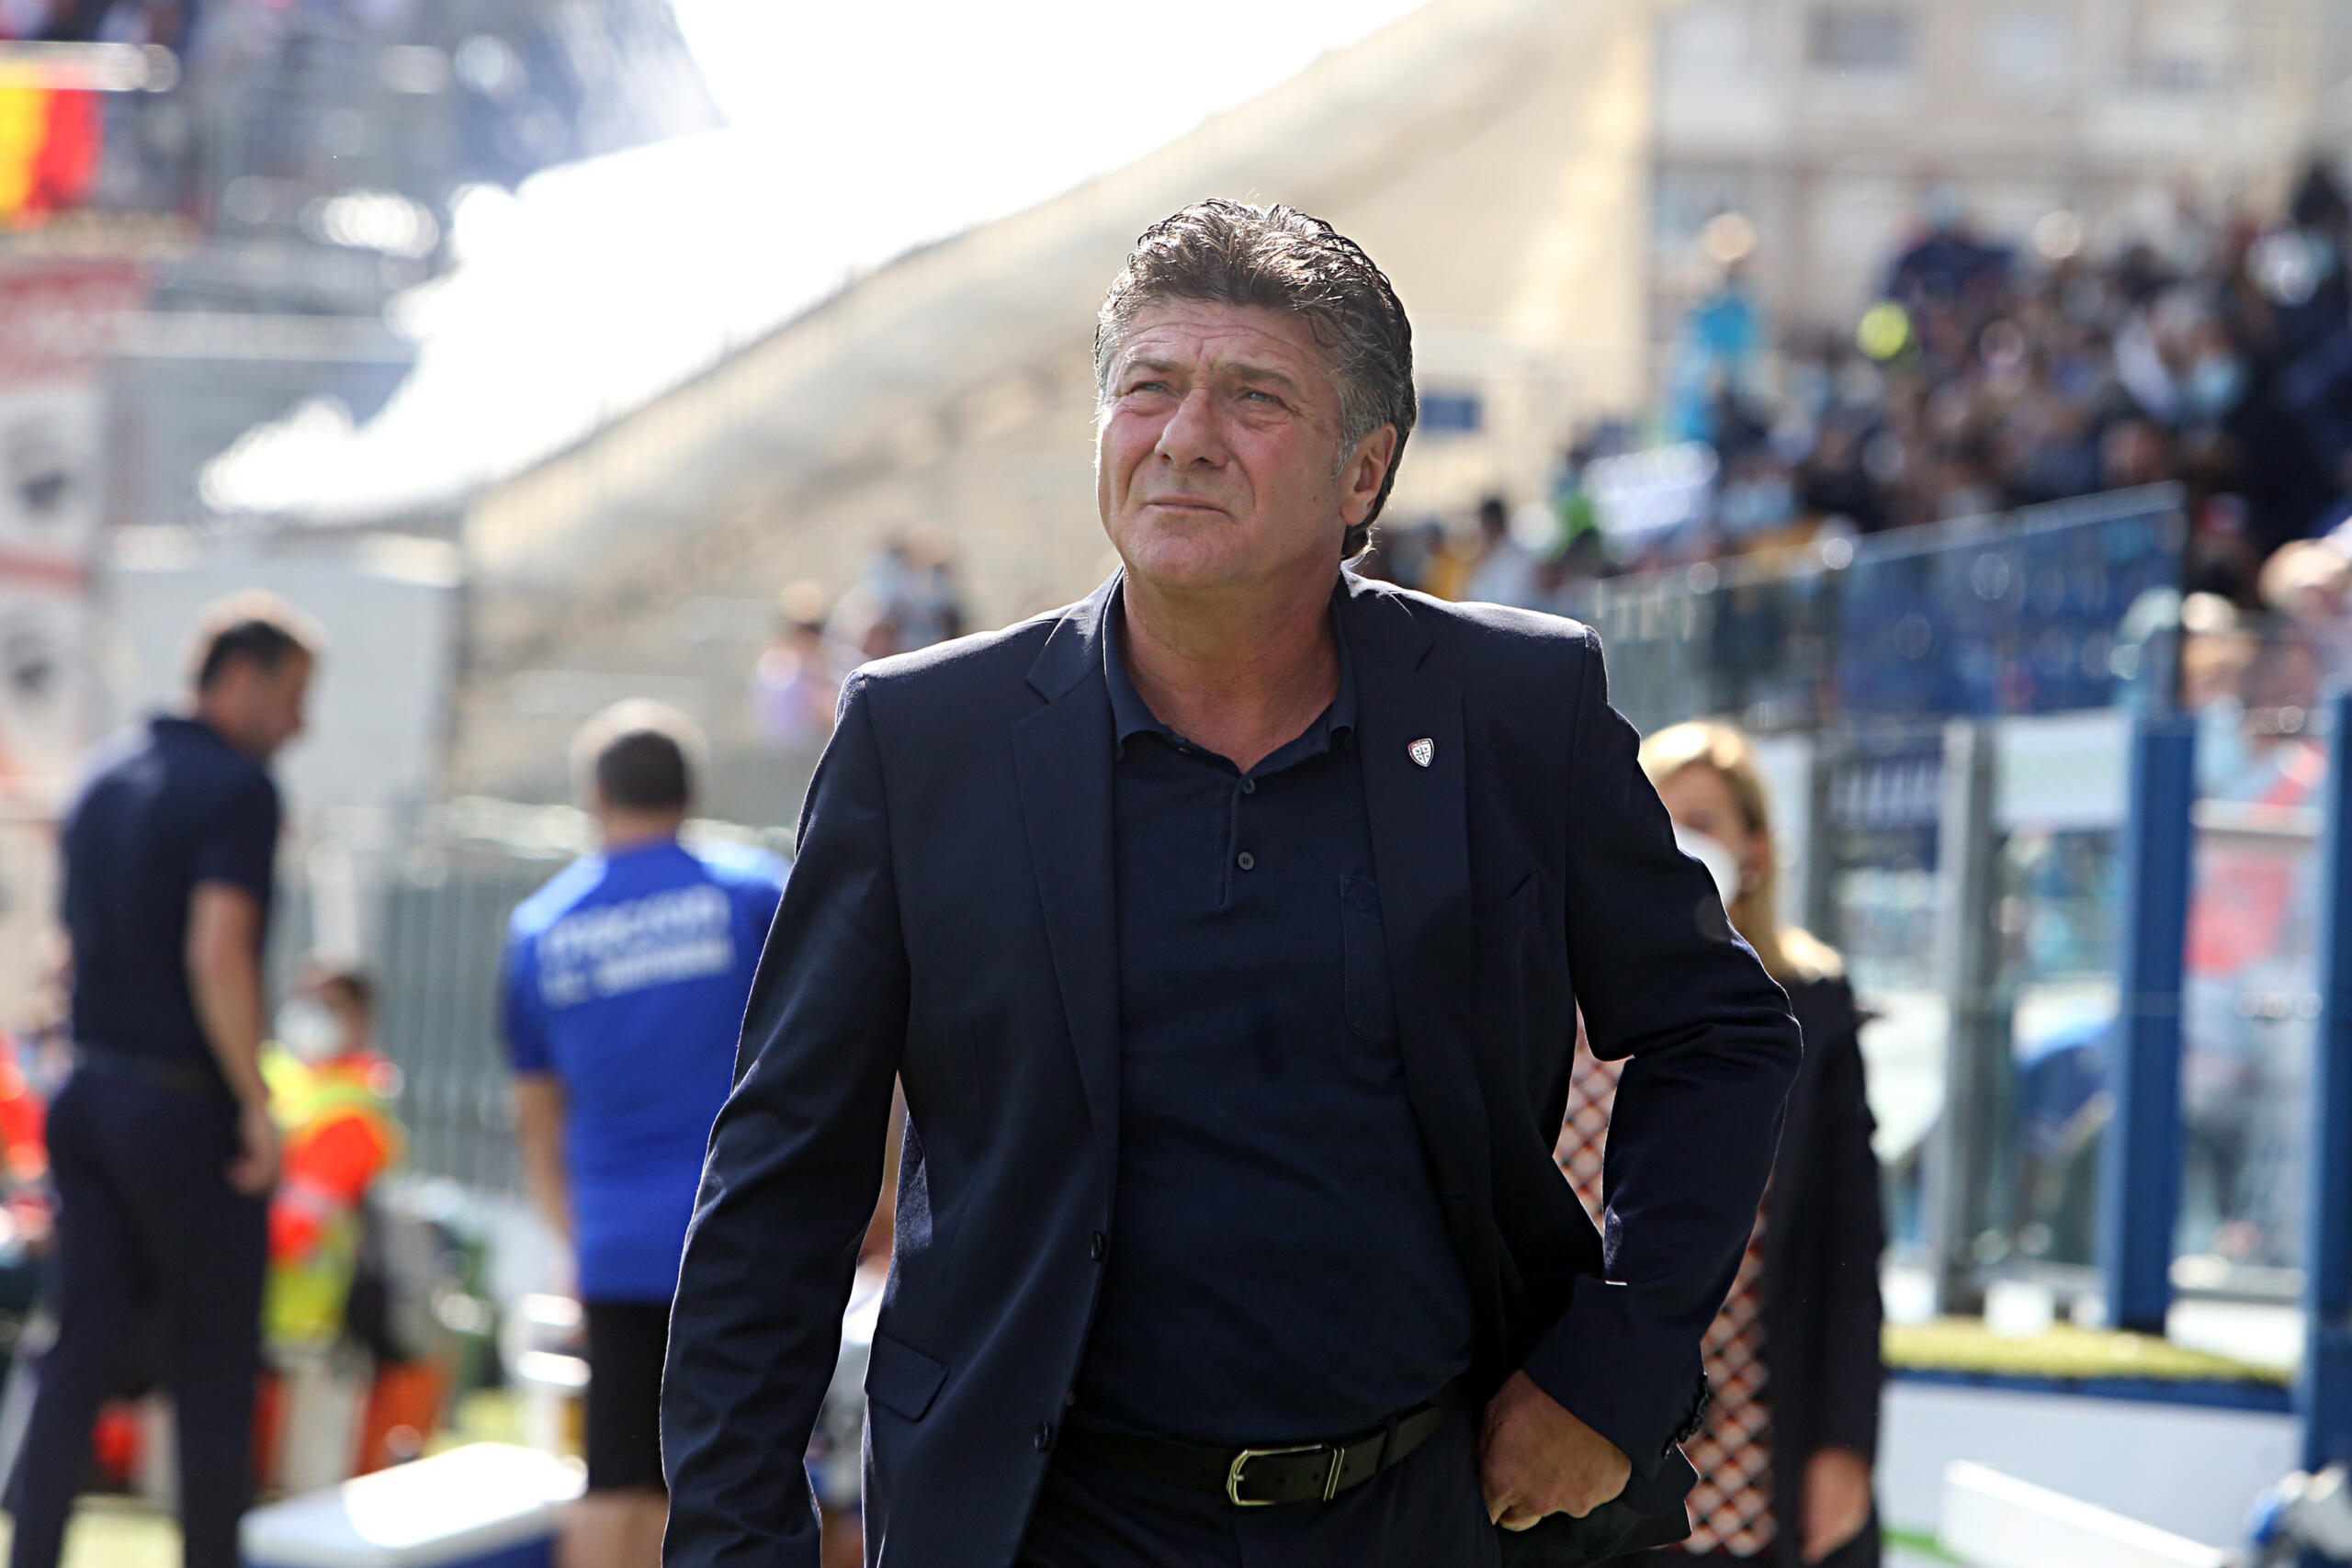 More details have emerged about Napoli going with Walter Mazzarri over Igor Tudor. It wasn’t just a contractual choice. The former accepted a seasonal deal.